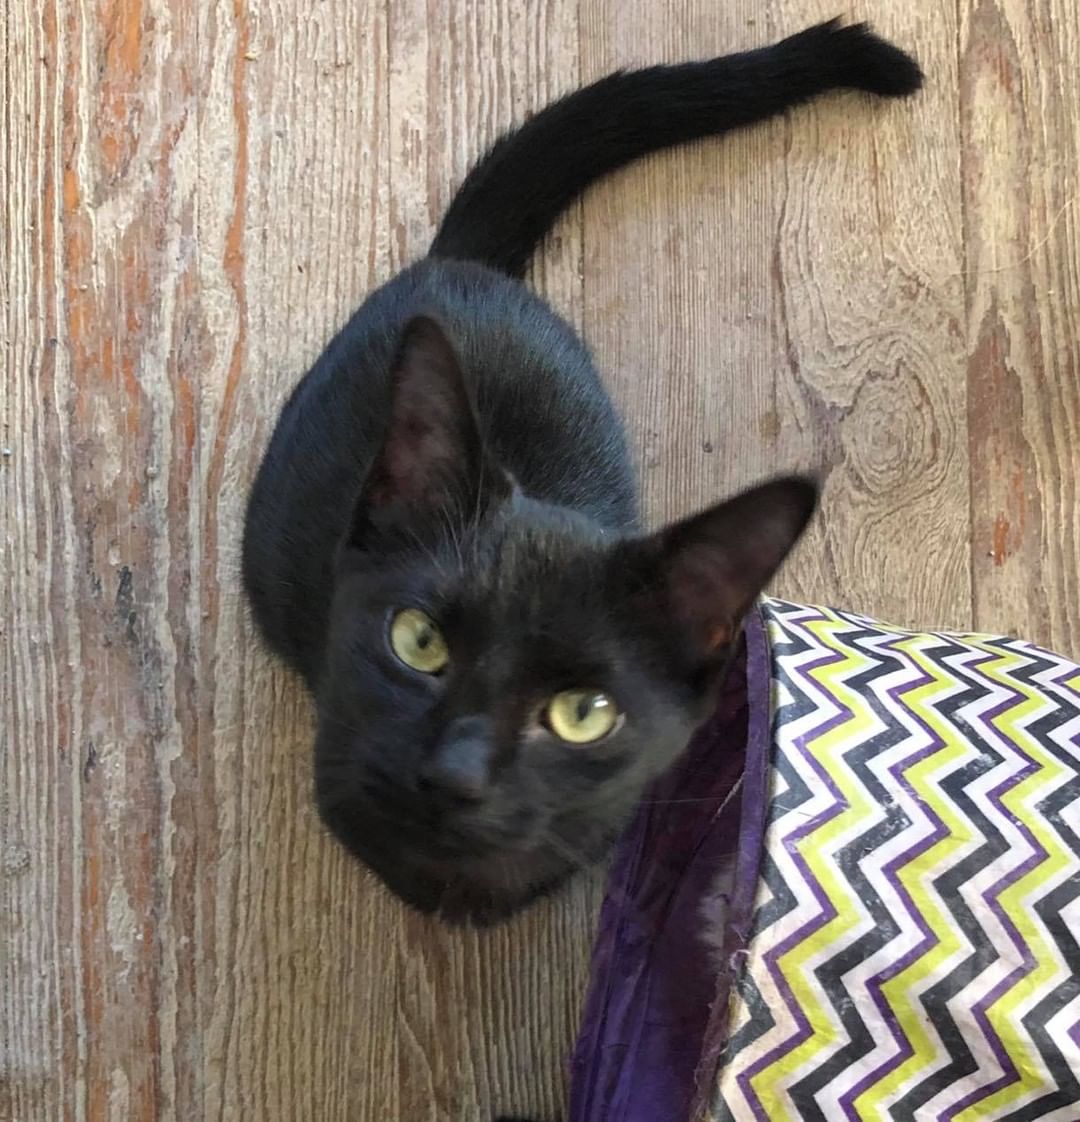 Our eleventh black kitty for November is Jubilee! This precious girl was rescued with her brother as babies and brought to the shelter. She is super sweet and ready for a loving home of her own! Jubilee is 5 months old, spayed, FIV/FELV negative and up to date on vaccines. To put in an application click on the link below.

https://www.sbanimalrescue.org/adopt